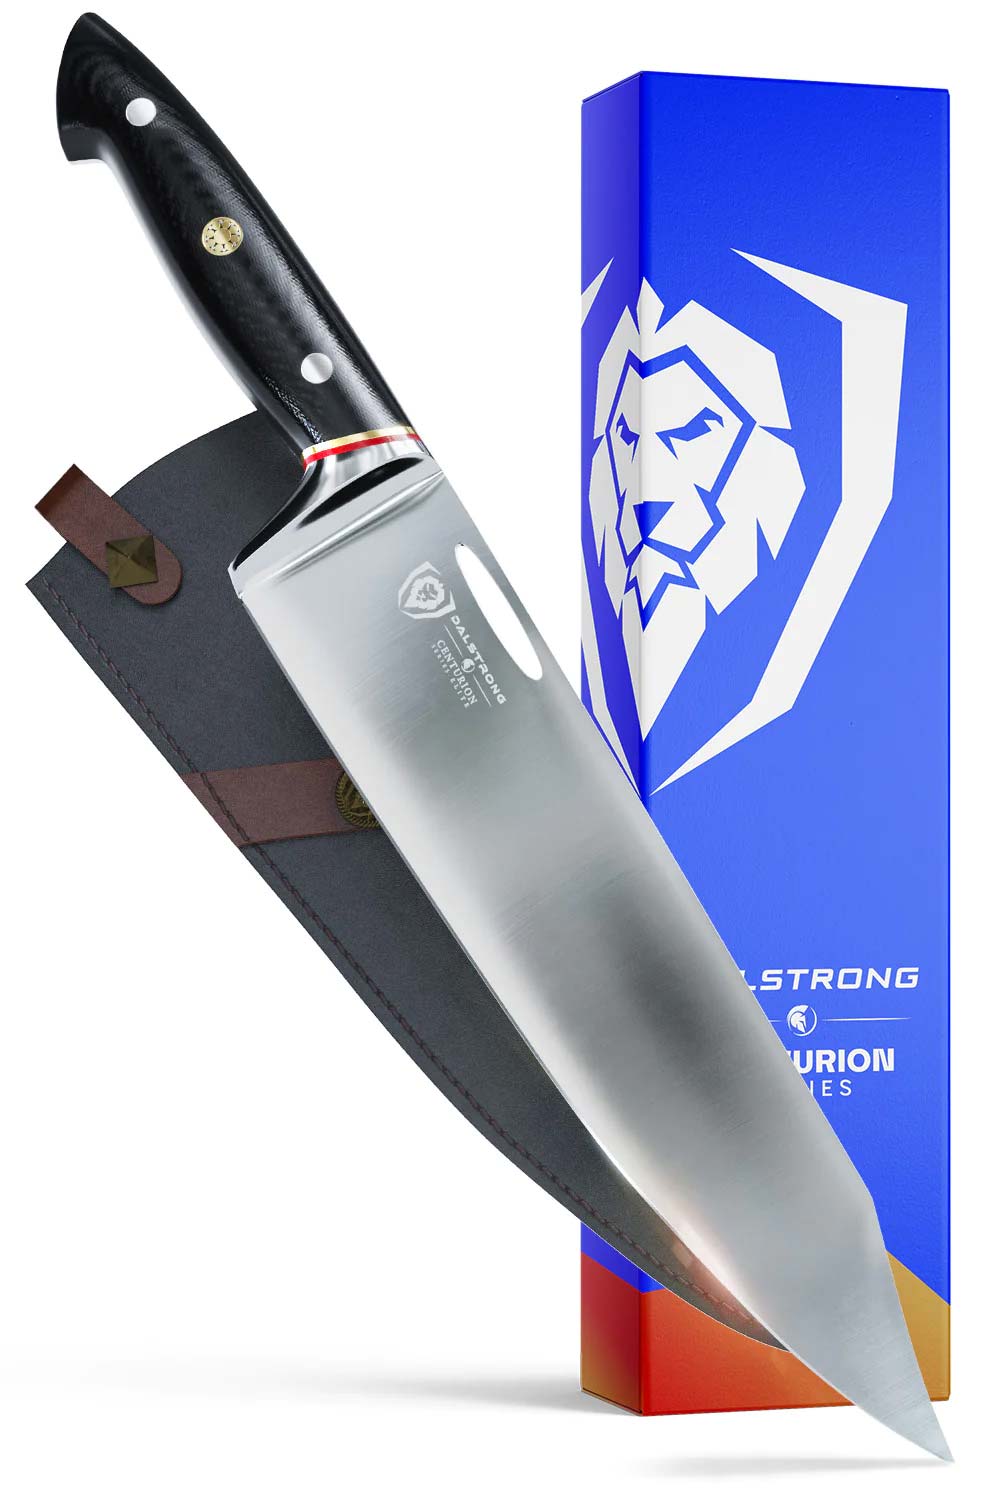 Dalstrong centurion series 10 inch chef knife with black handle in front of it's premium packaging.